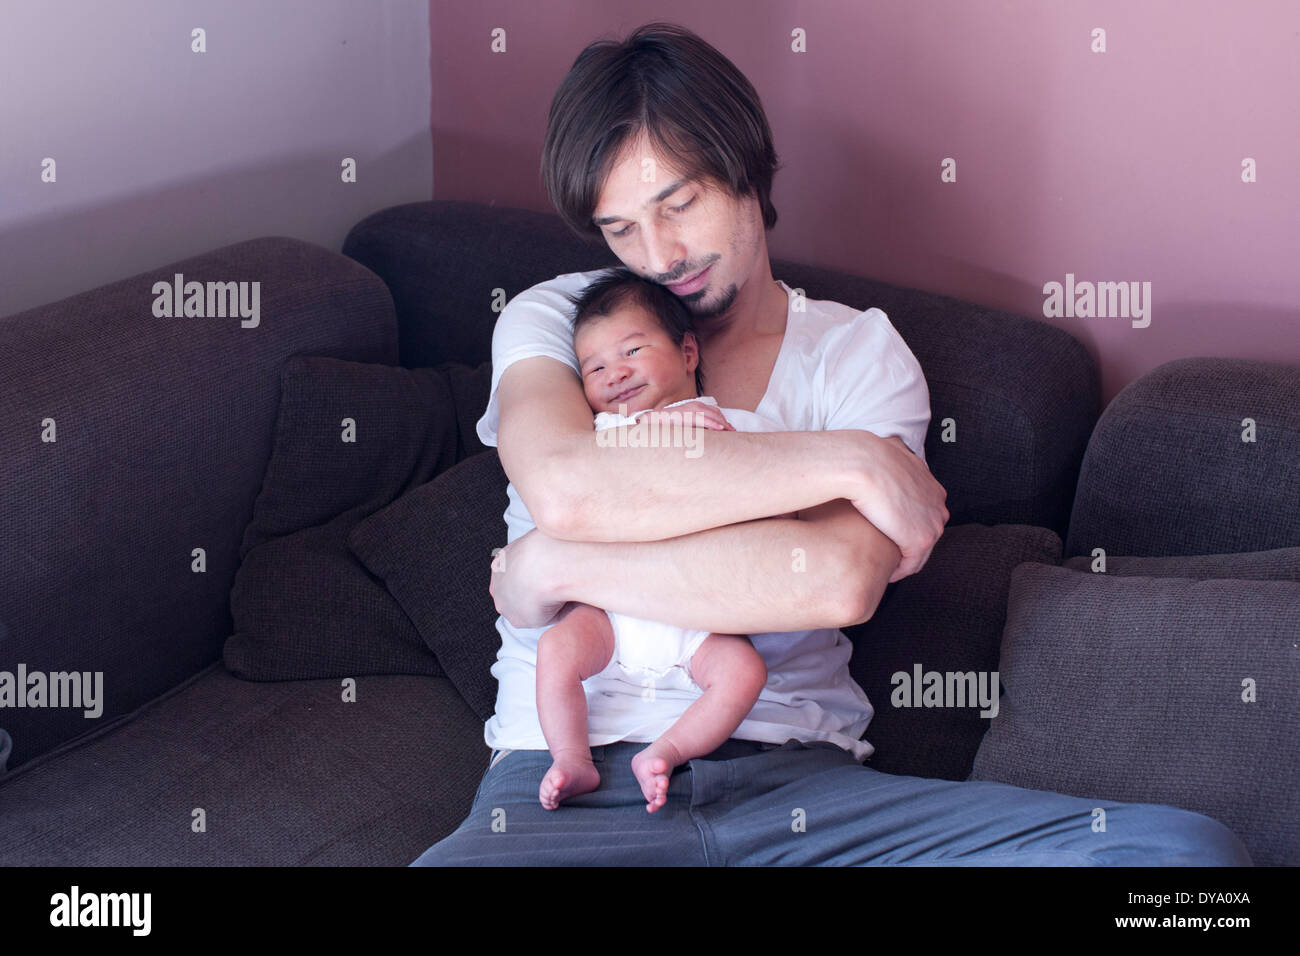 Father with baby, portrait Stock Photo